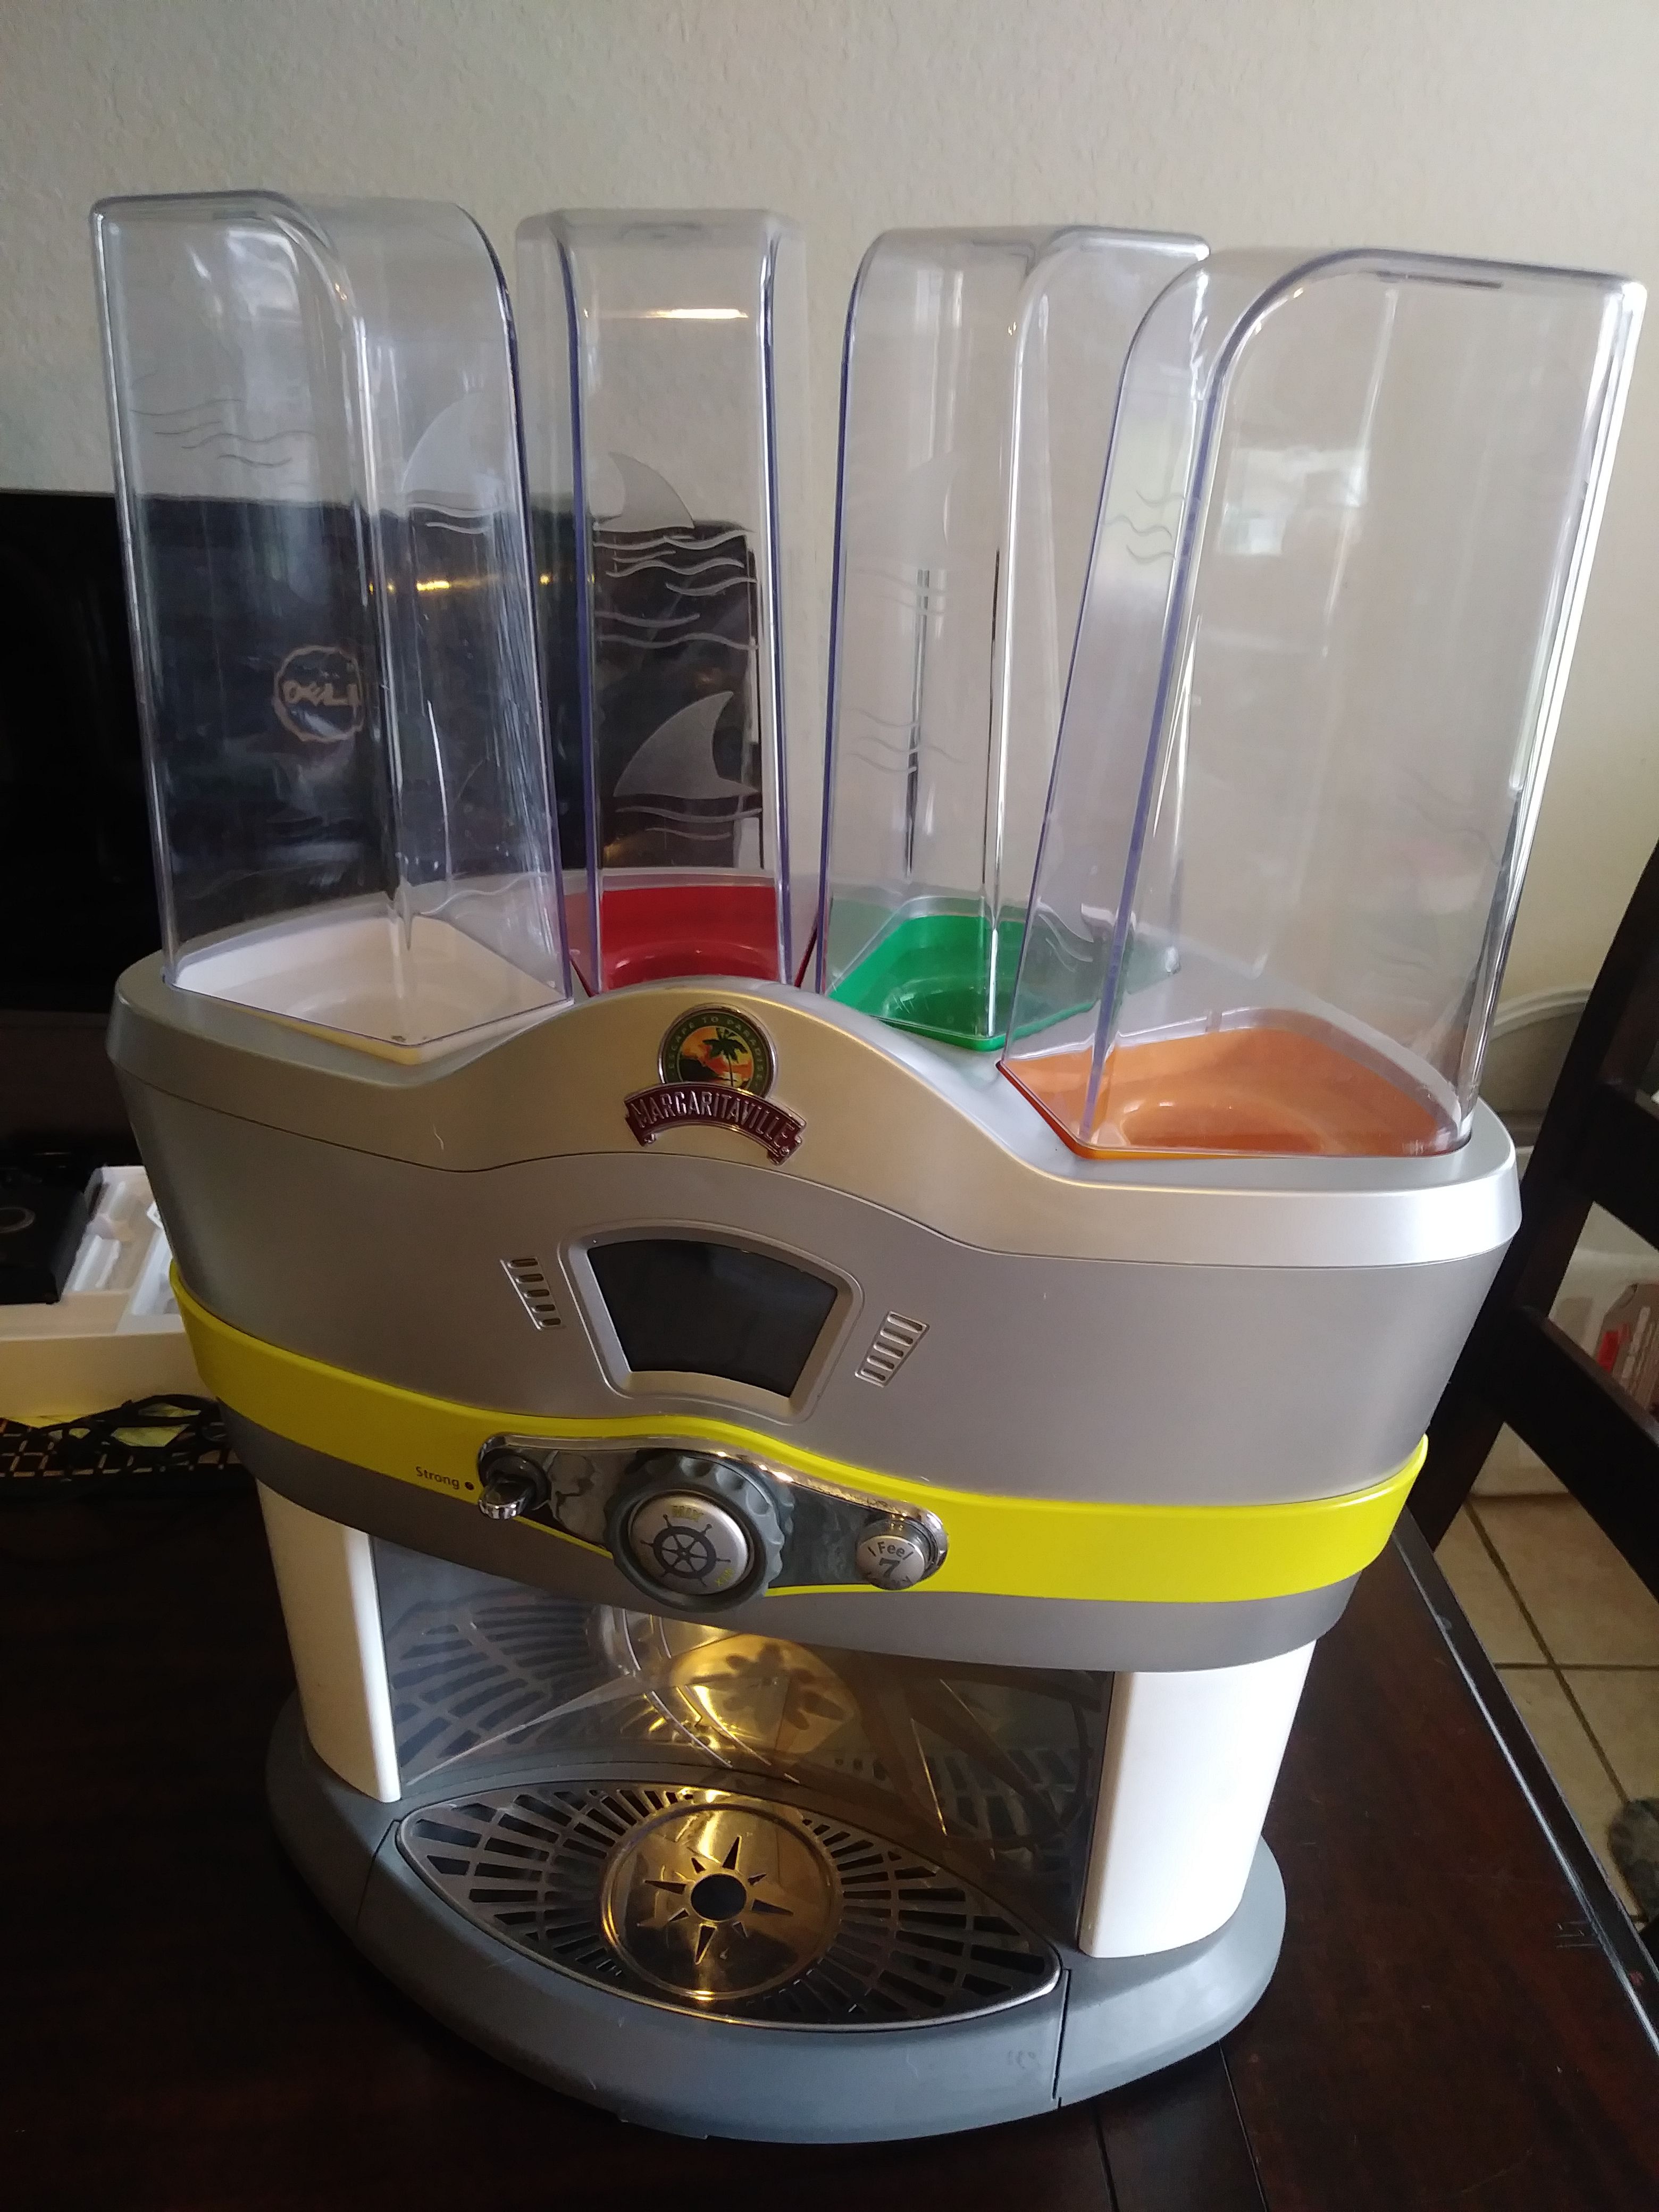 Margaritaville Mixed Drink Maker with Two Free Liquor Tanks ($40 retail  value)